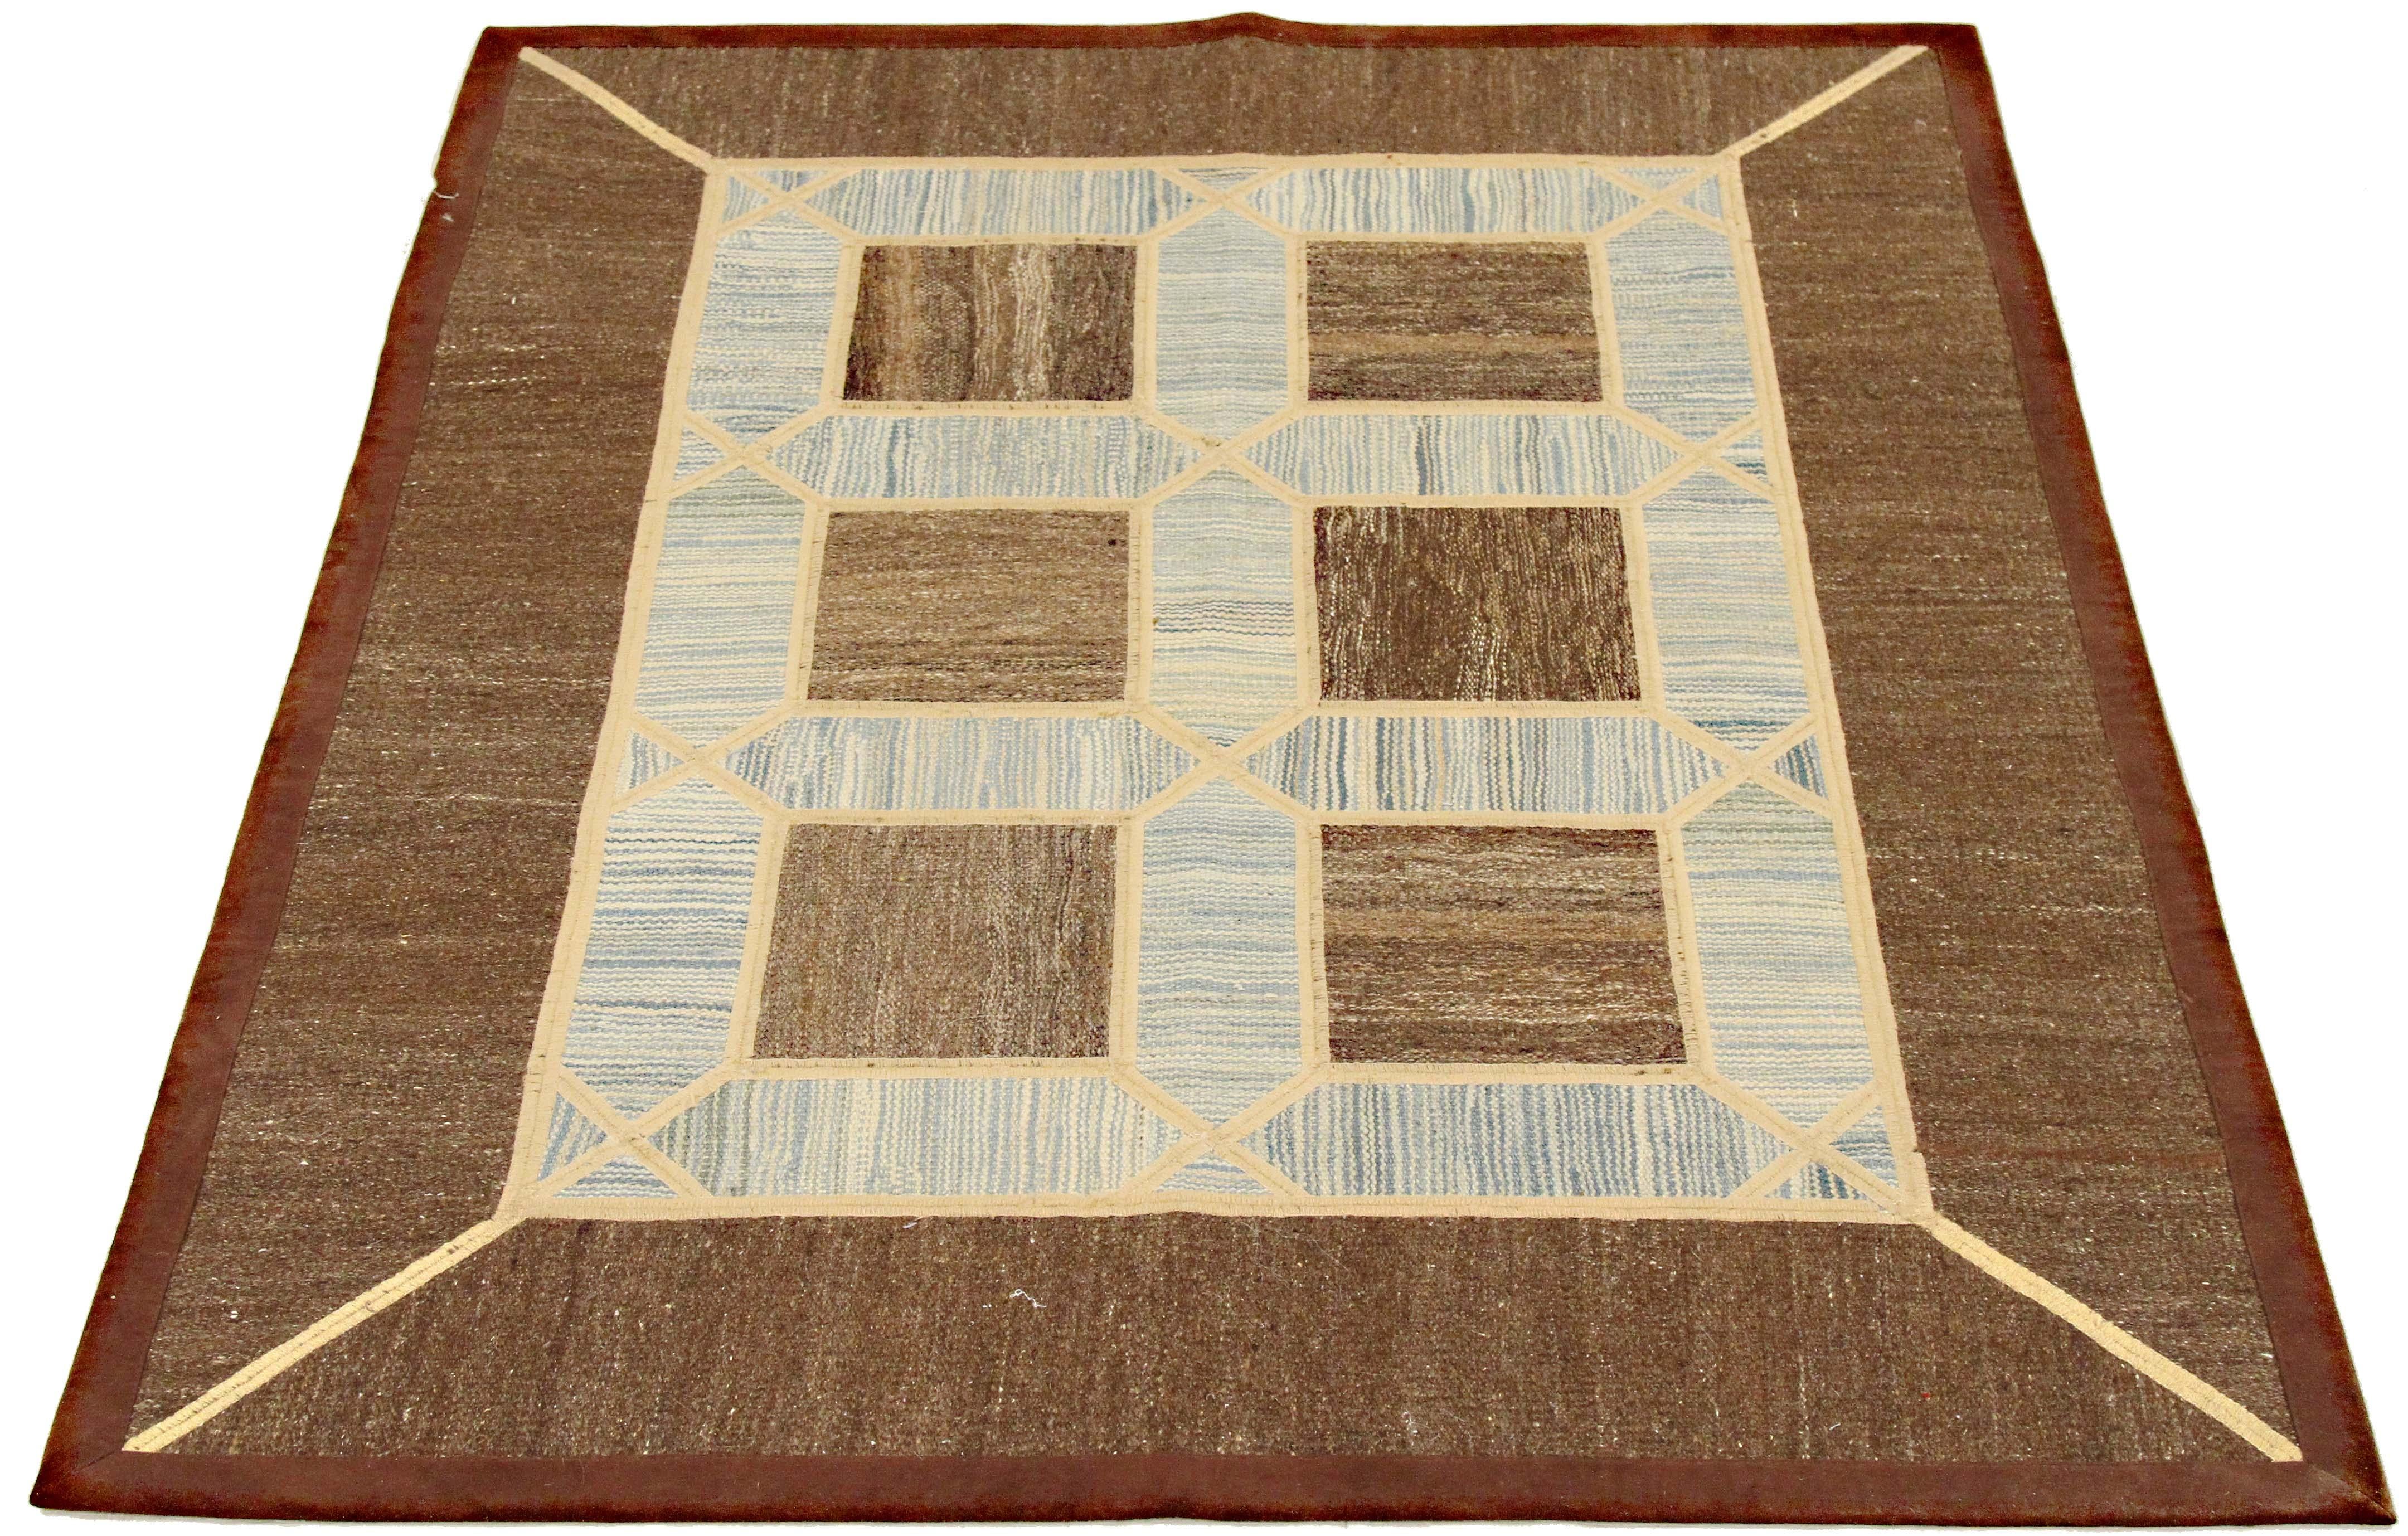 Modern Turkish rug handwoven from the finest sheep’s wool and colored with all-natural vegetable dyes that are safe for humans and pets. It’s a traditional Patch Kilim flat-weave design featuring elegant geometric patterns of gray and beige on a